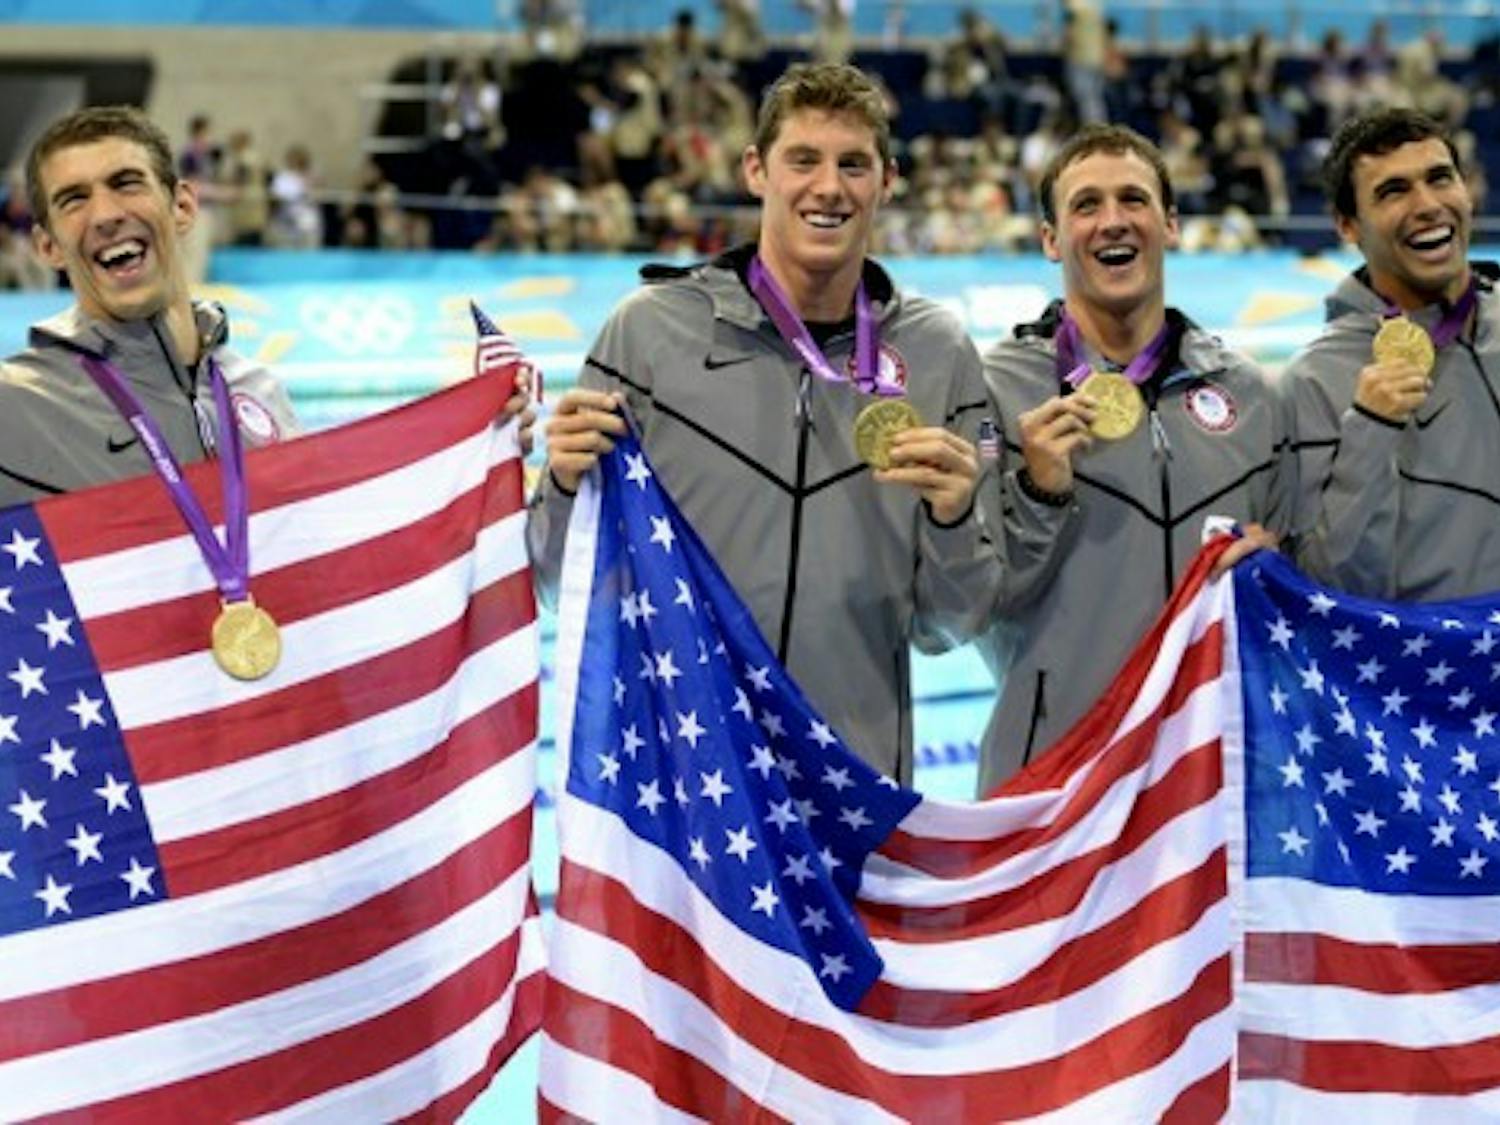 The U.S. men’s 4x200m freestyle relay team poses with its gold medals after the race Tuesday in London. Former Gators Conor Dwyer (middle left) and Ryan Lochte (middle right) helped Michael Phelps (far left) earn his 15th gold medal and record-breaking 19th Olympic medal.